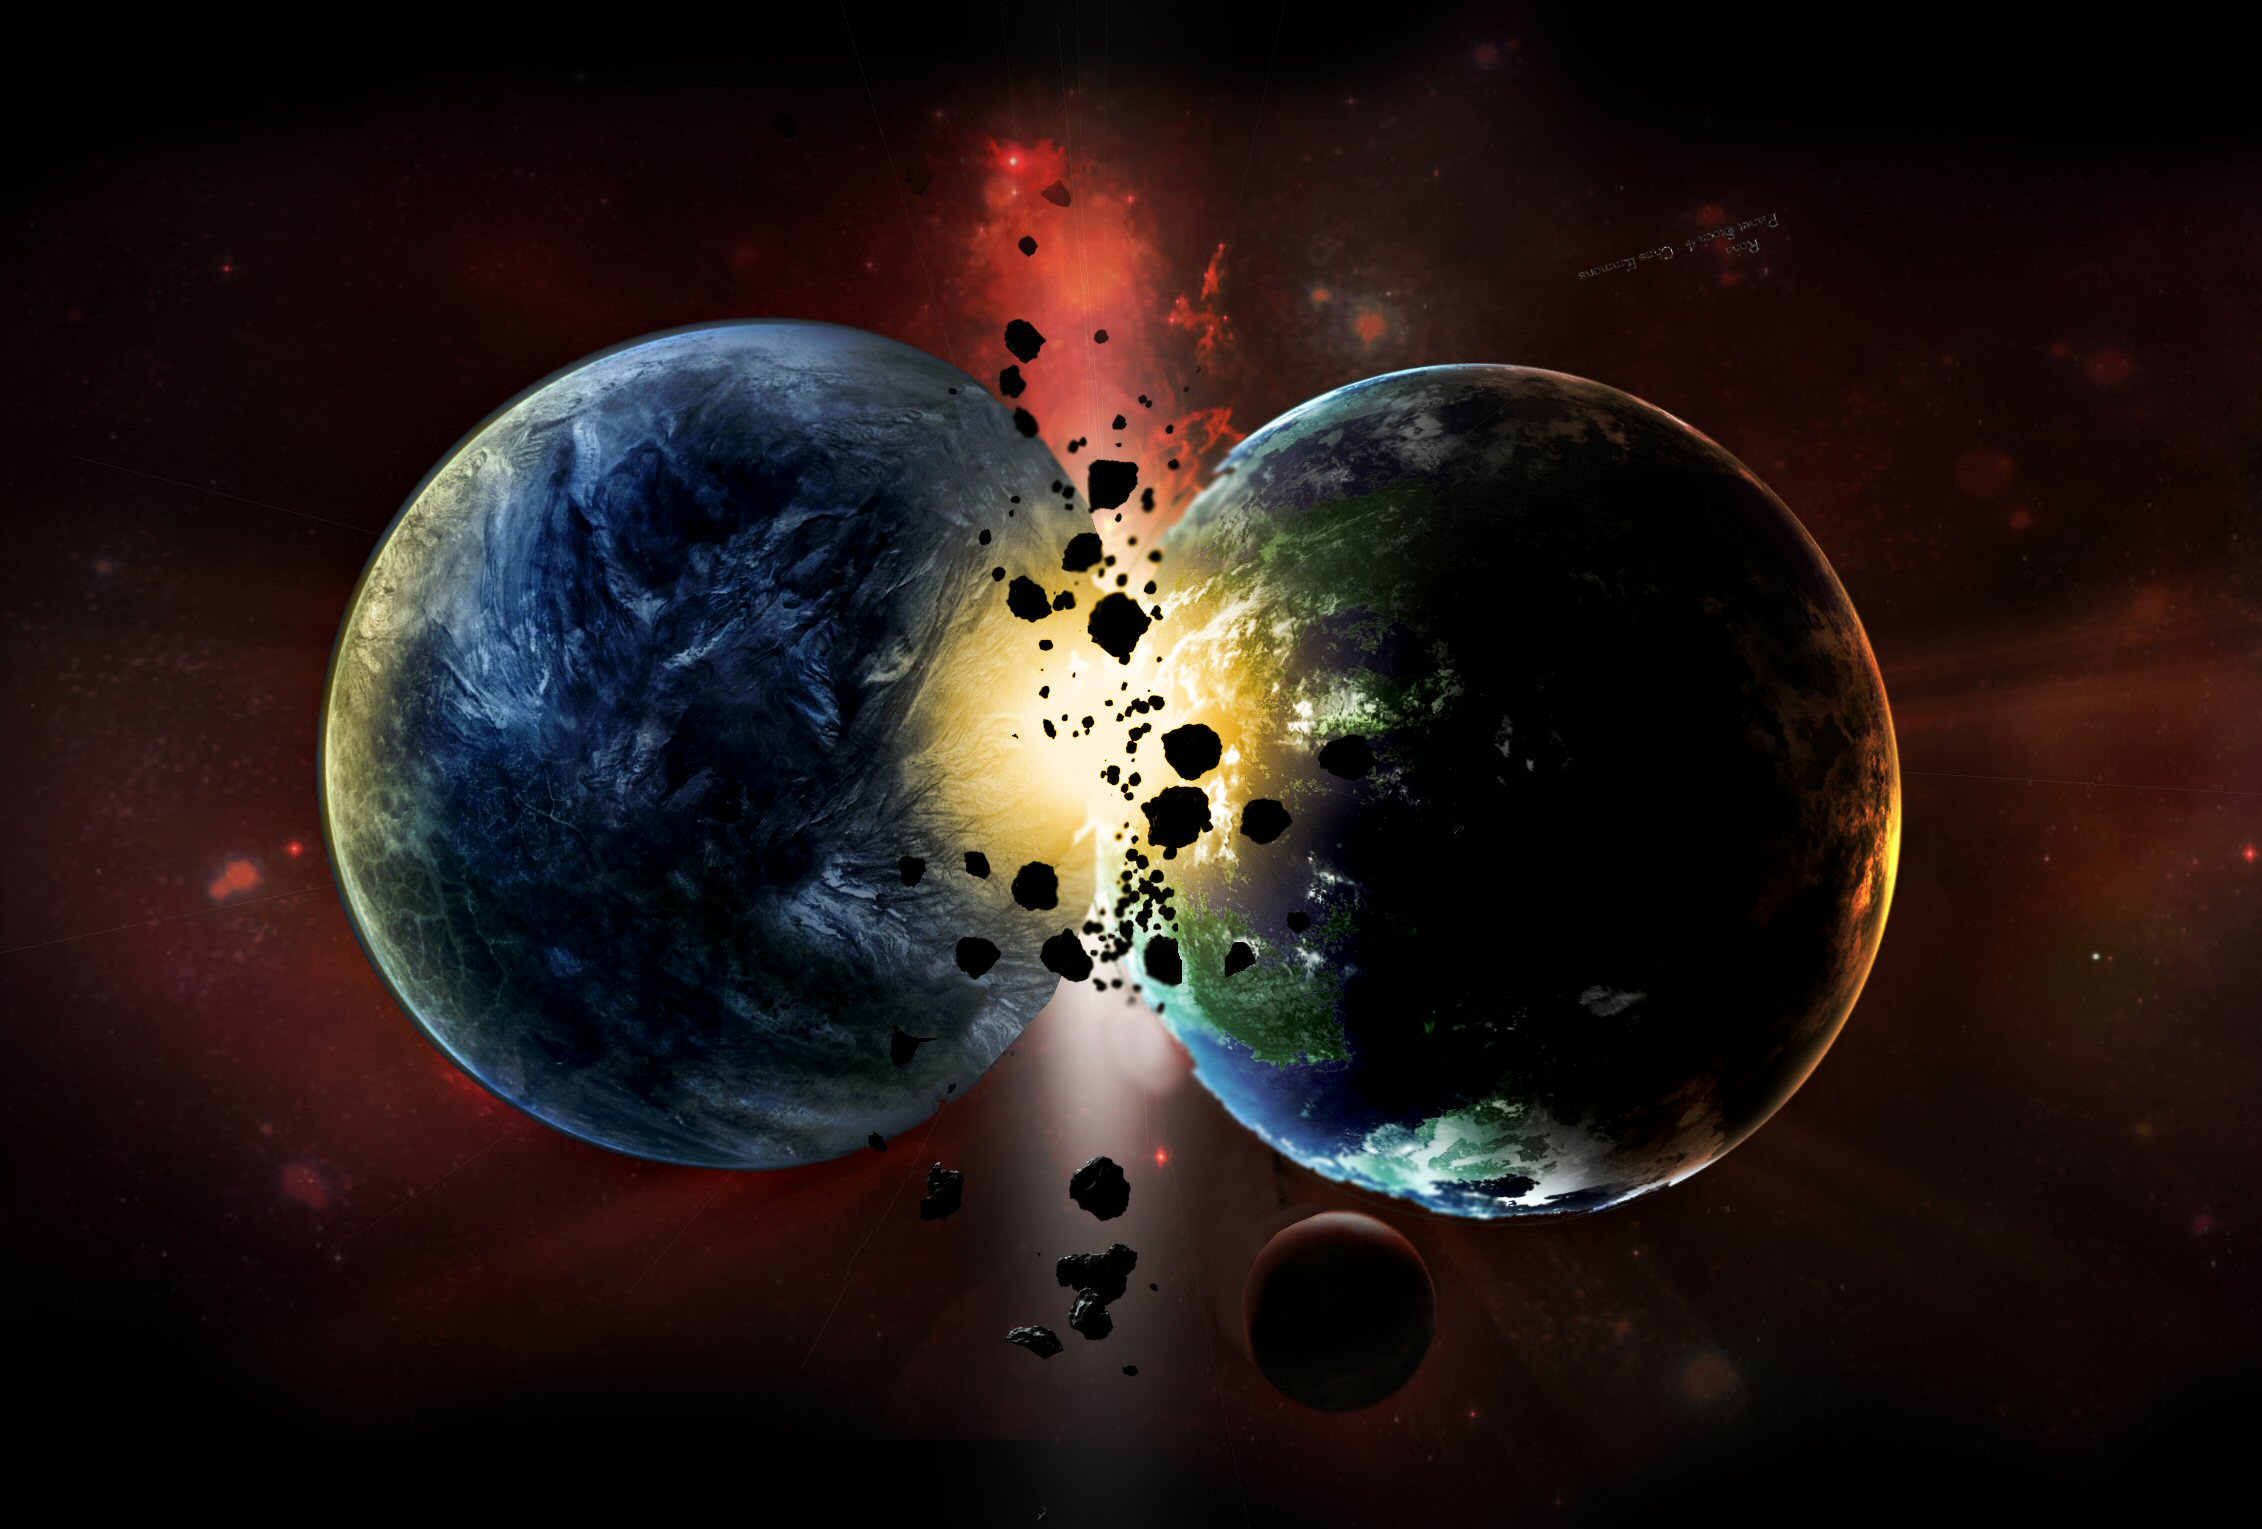 Planets_Collide_by_ThornErose.jpg